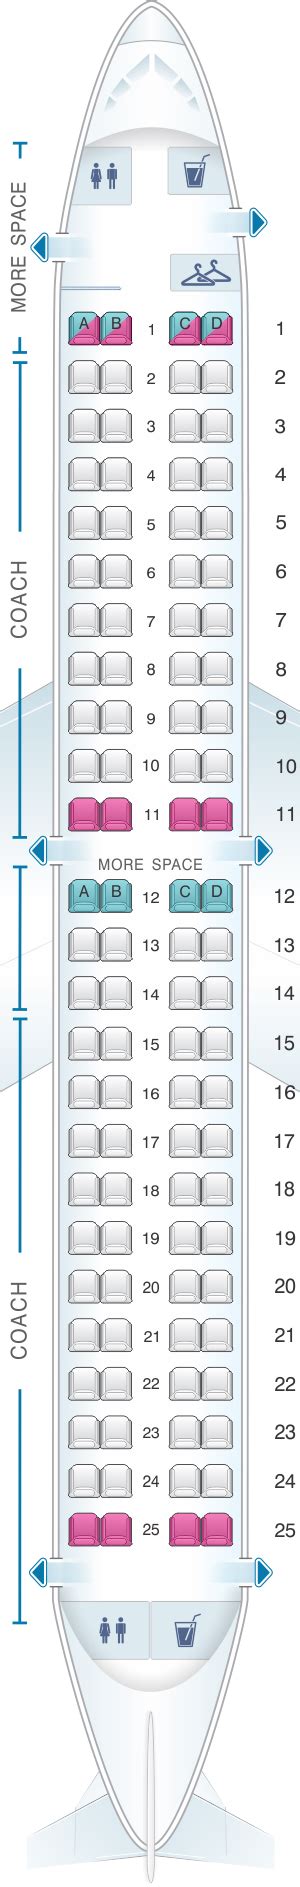 Seats 44. Pitch 31". Width 17.3". Recline 3". When flying with Airlink on their Embraer ERJ 140, passengers in economy class can anticipate a straightforward yet reliable experience. Designed to accommodate 44 travelers, the cabin merges affordability with necessary comforts. Functional seating and a variety of in-flight entertainment options ...